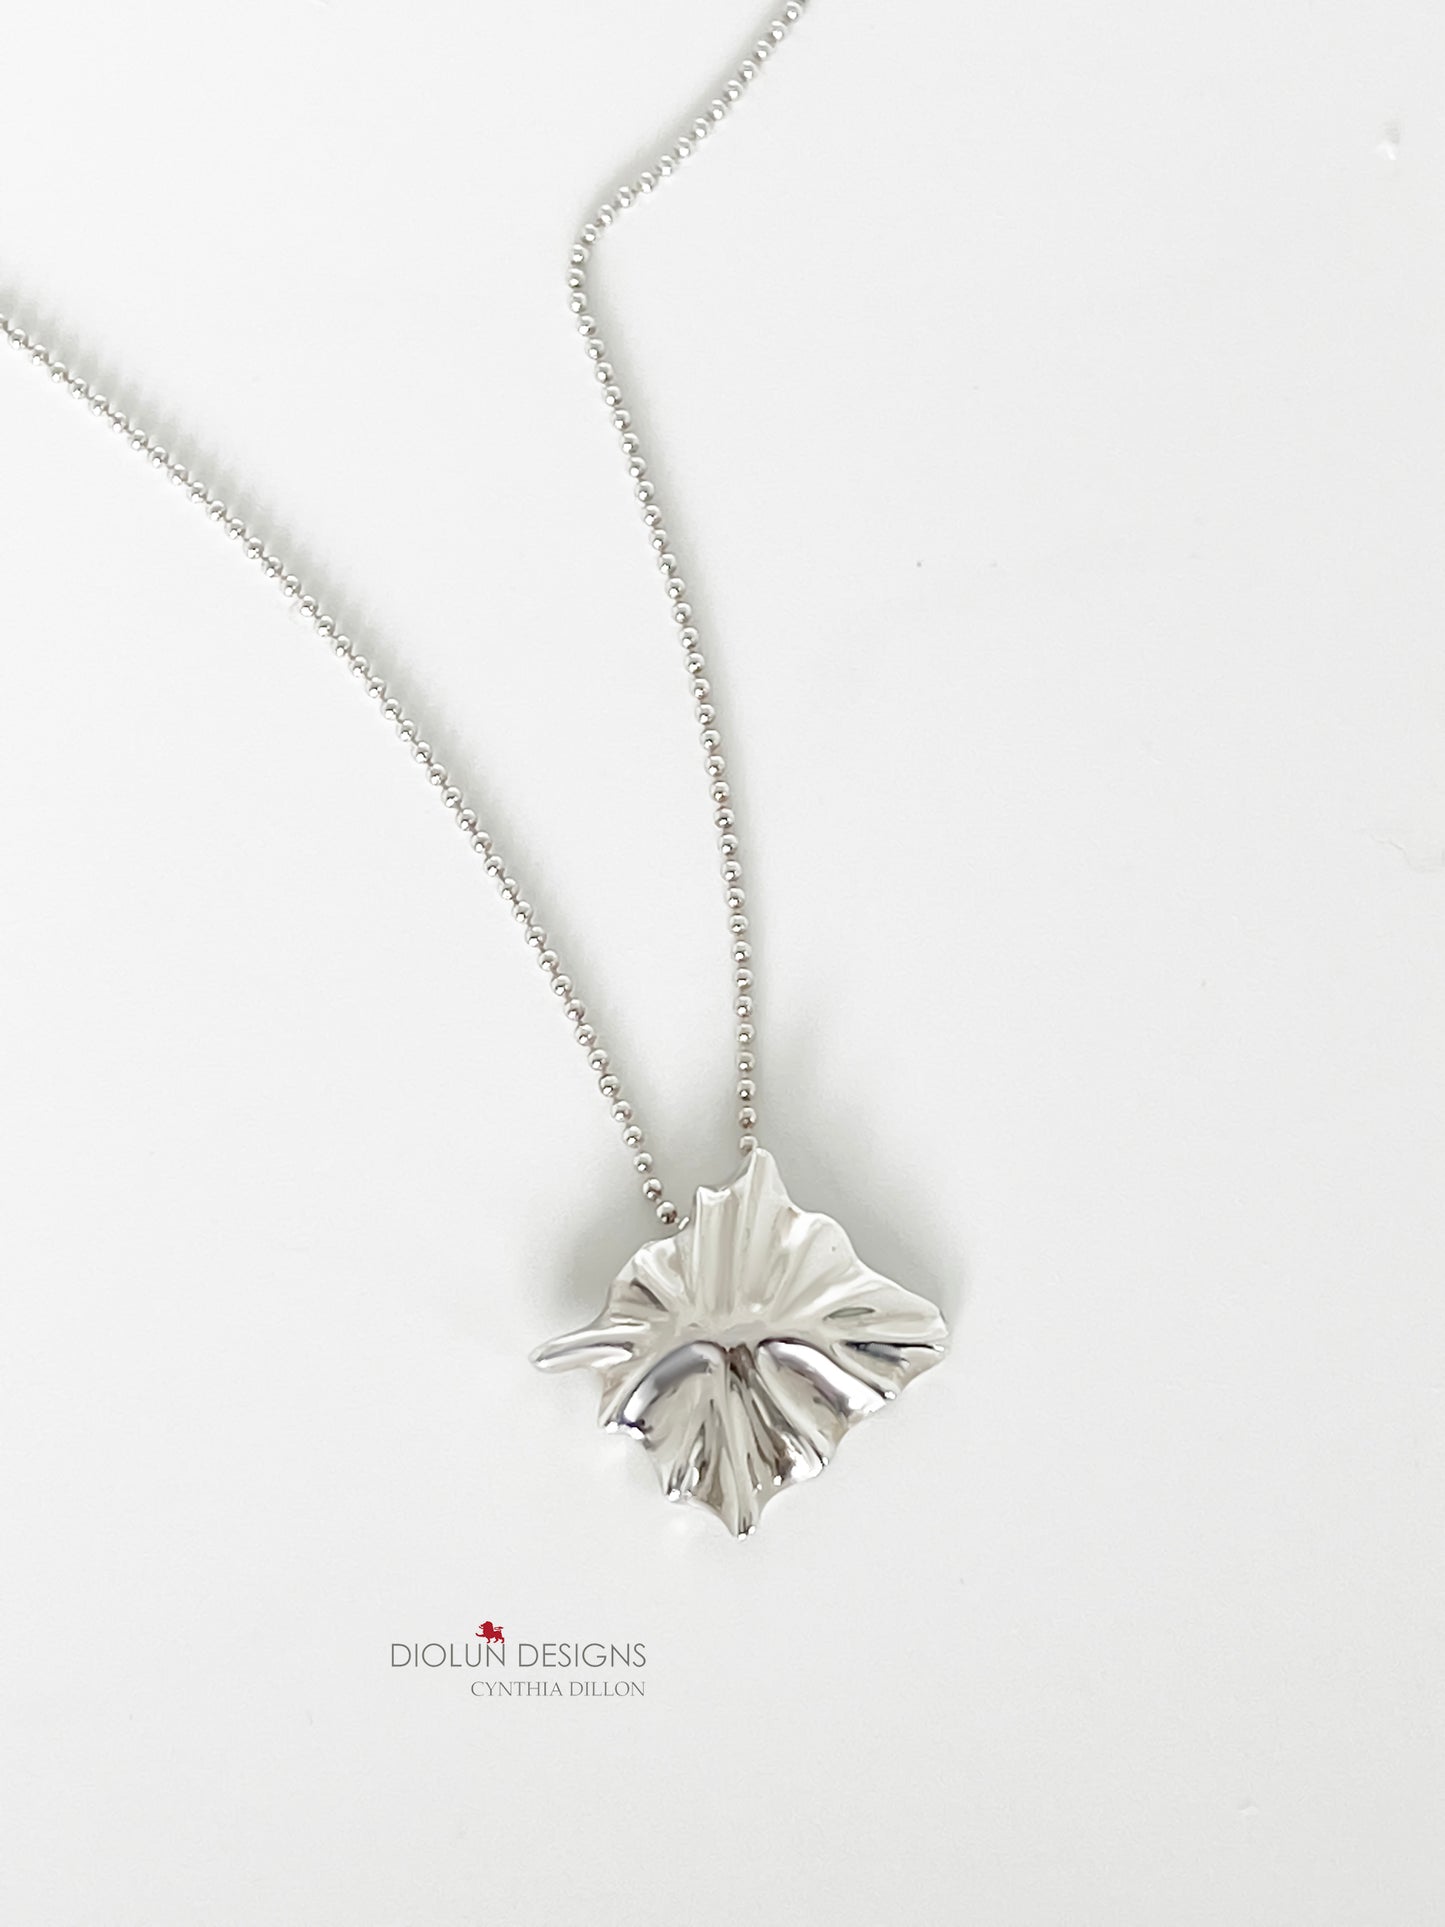 Pendant - Sculpted "Leaf"  in S/S w. 16" Chain.